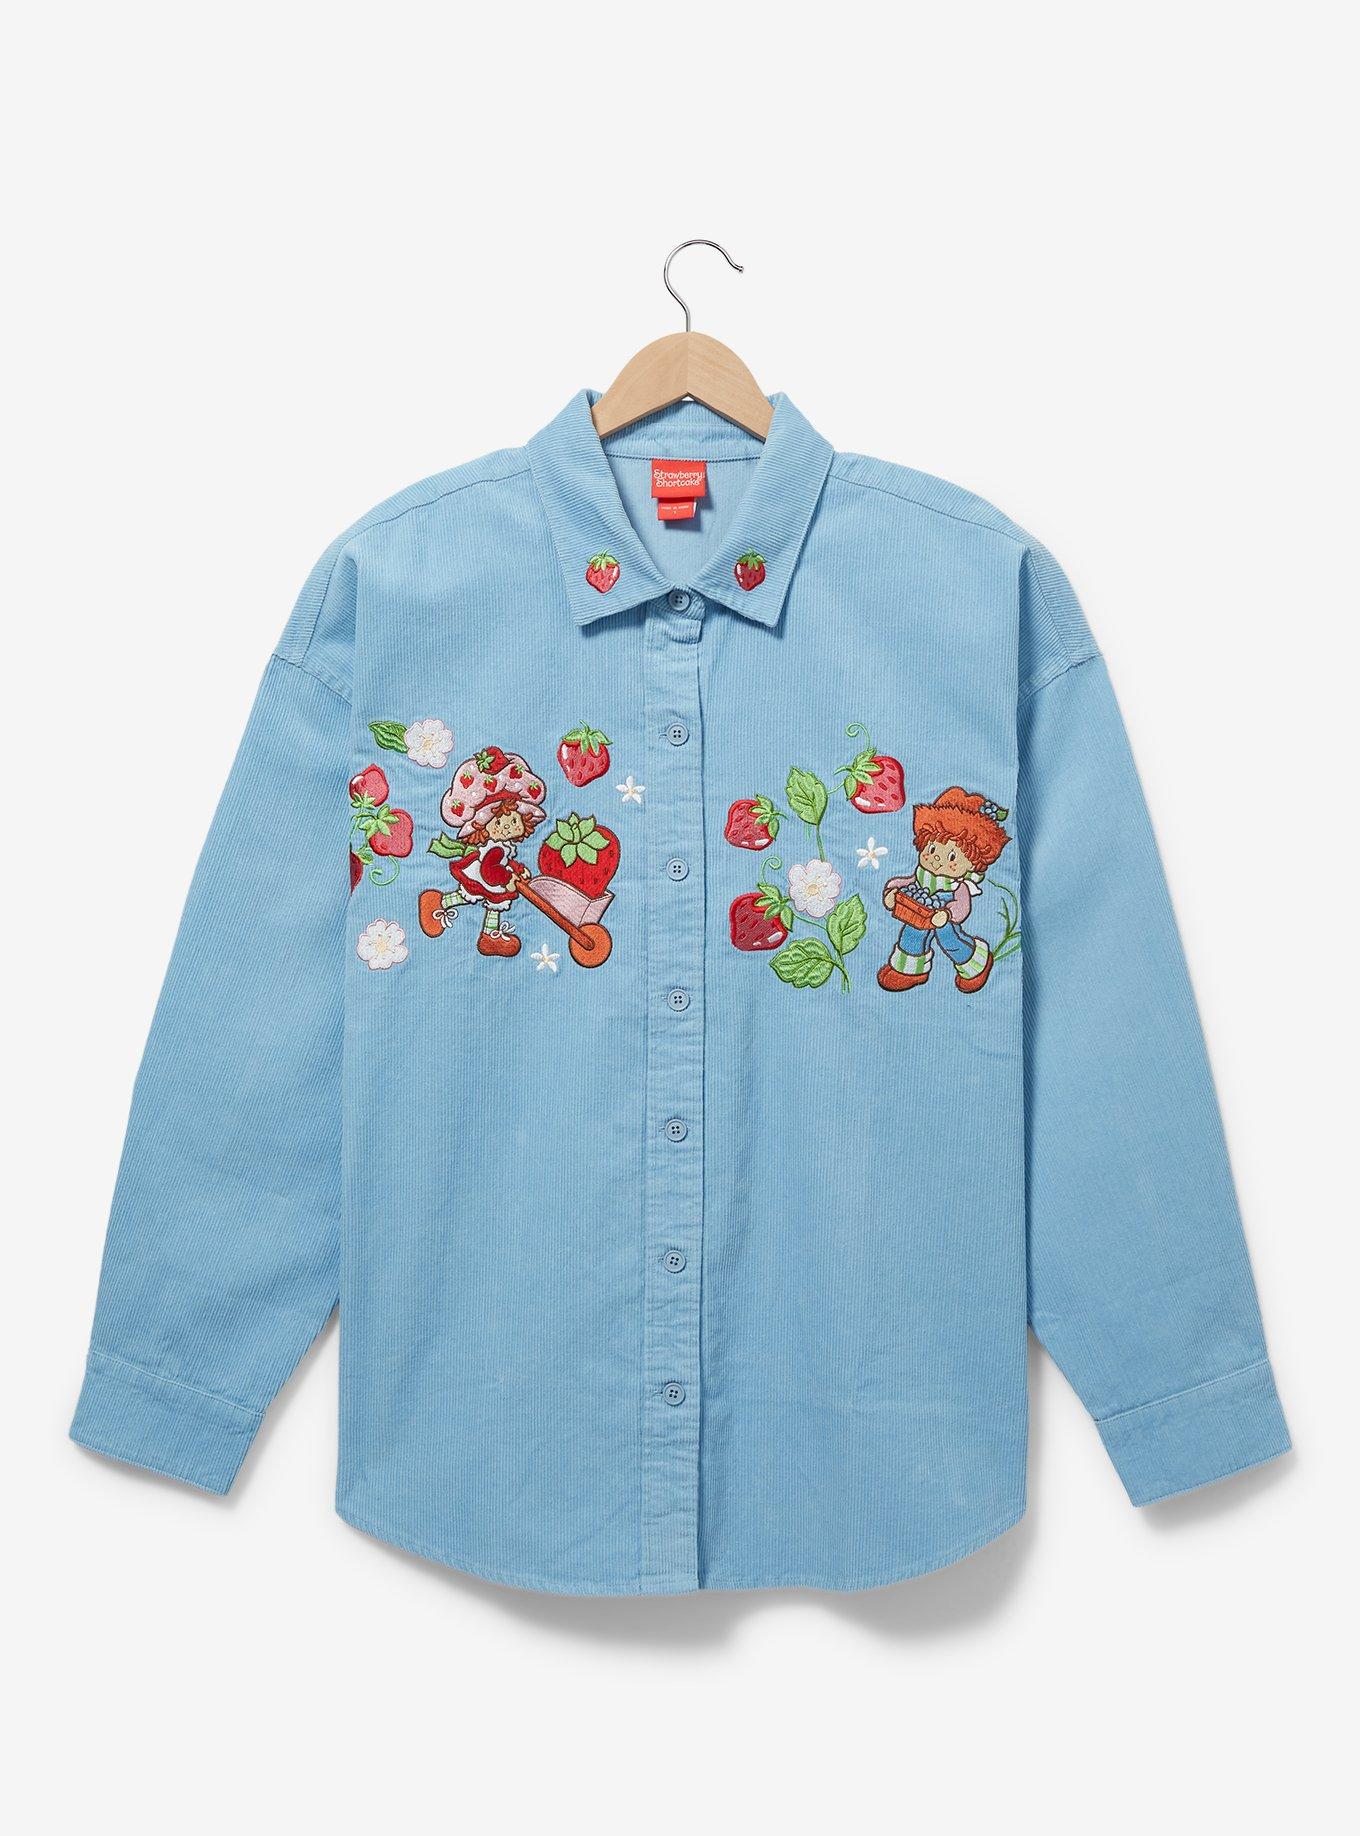 Strawberry Shortcake Embroidered Plus Size Shacket - BoxLunch Exclusive, DENIM, hi-res